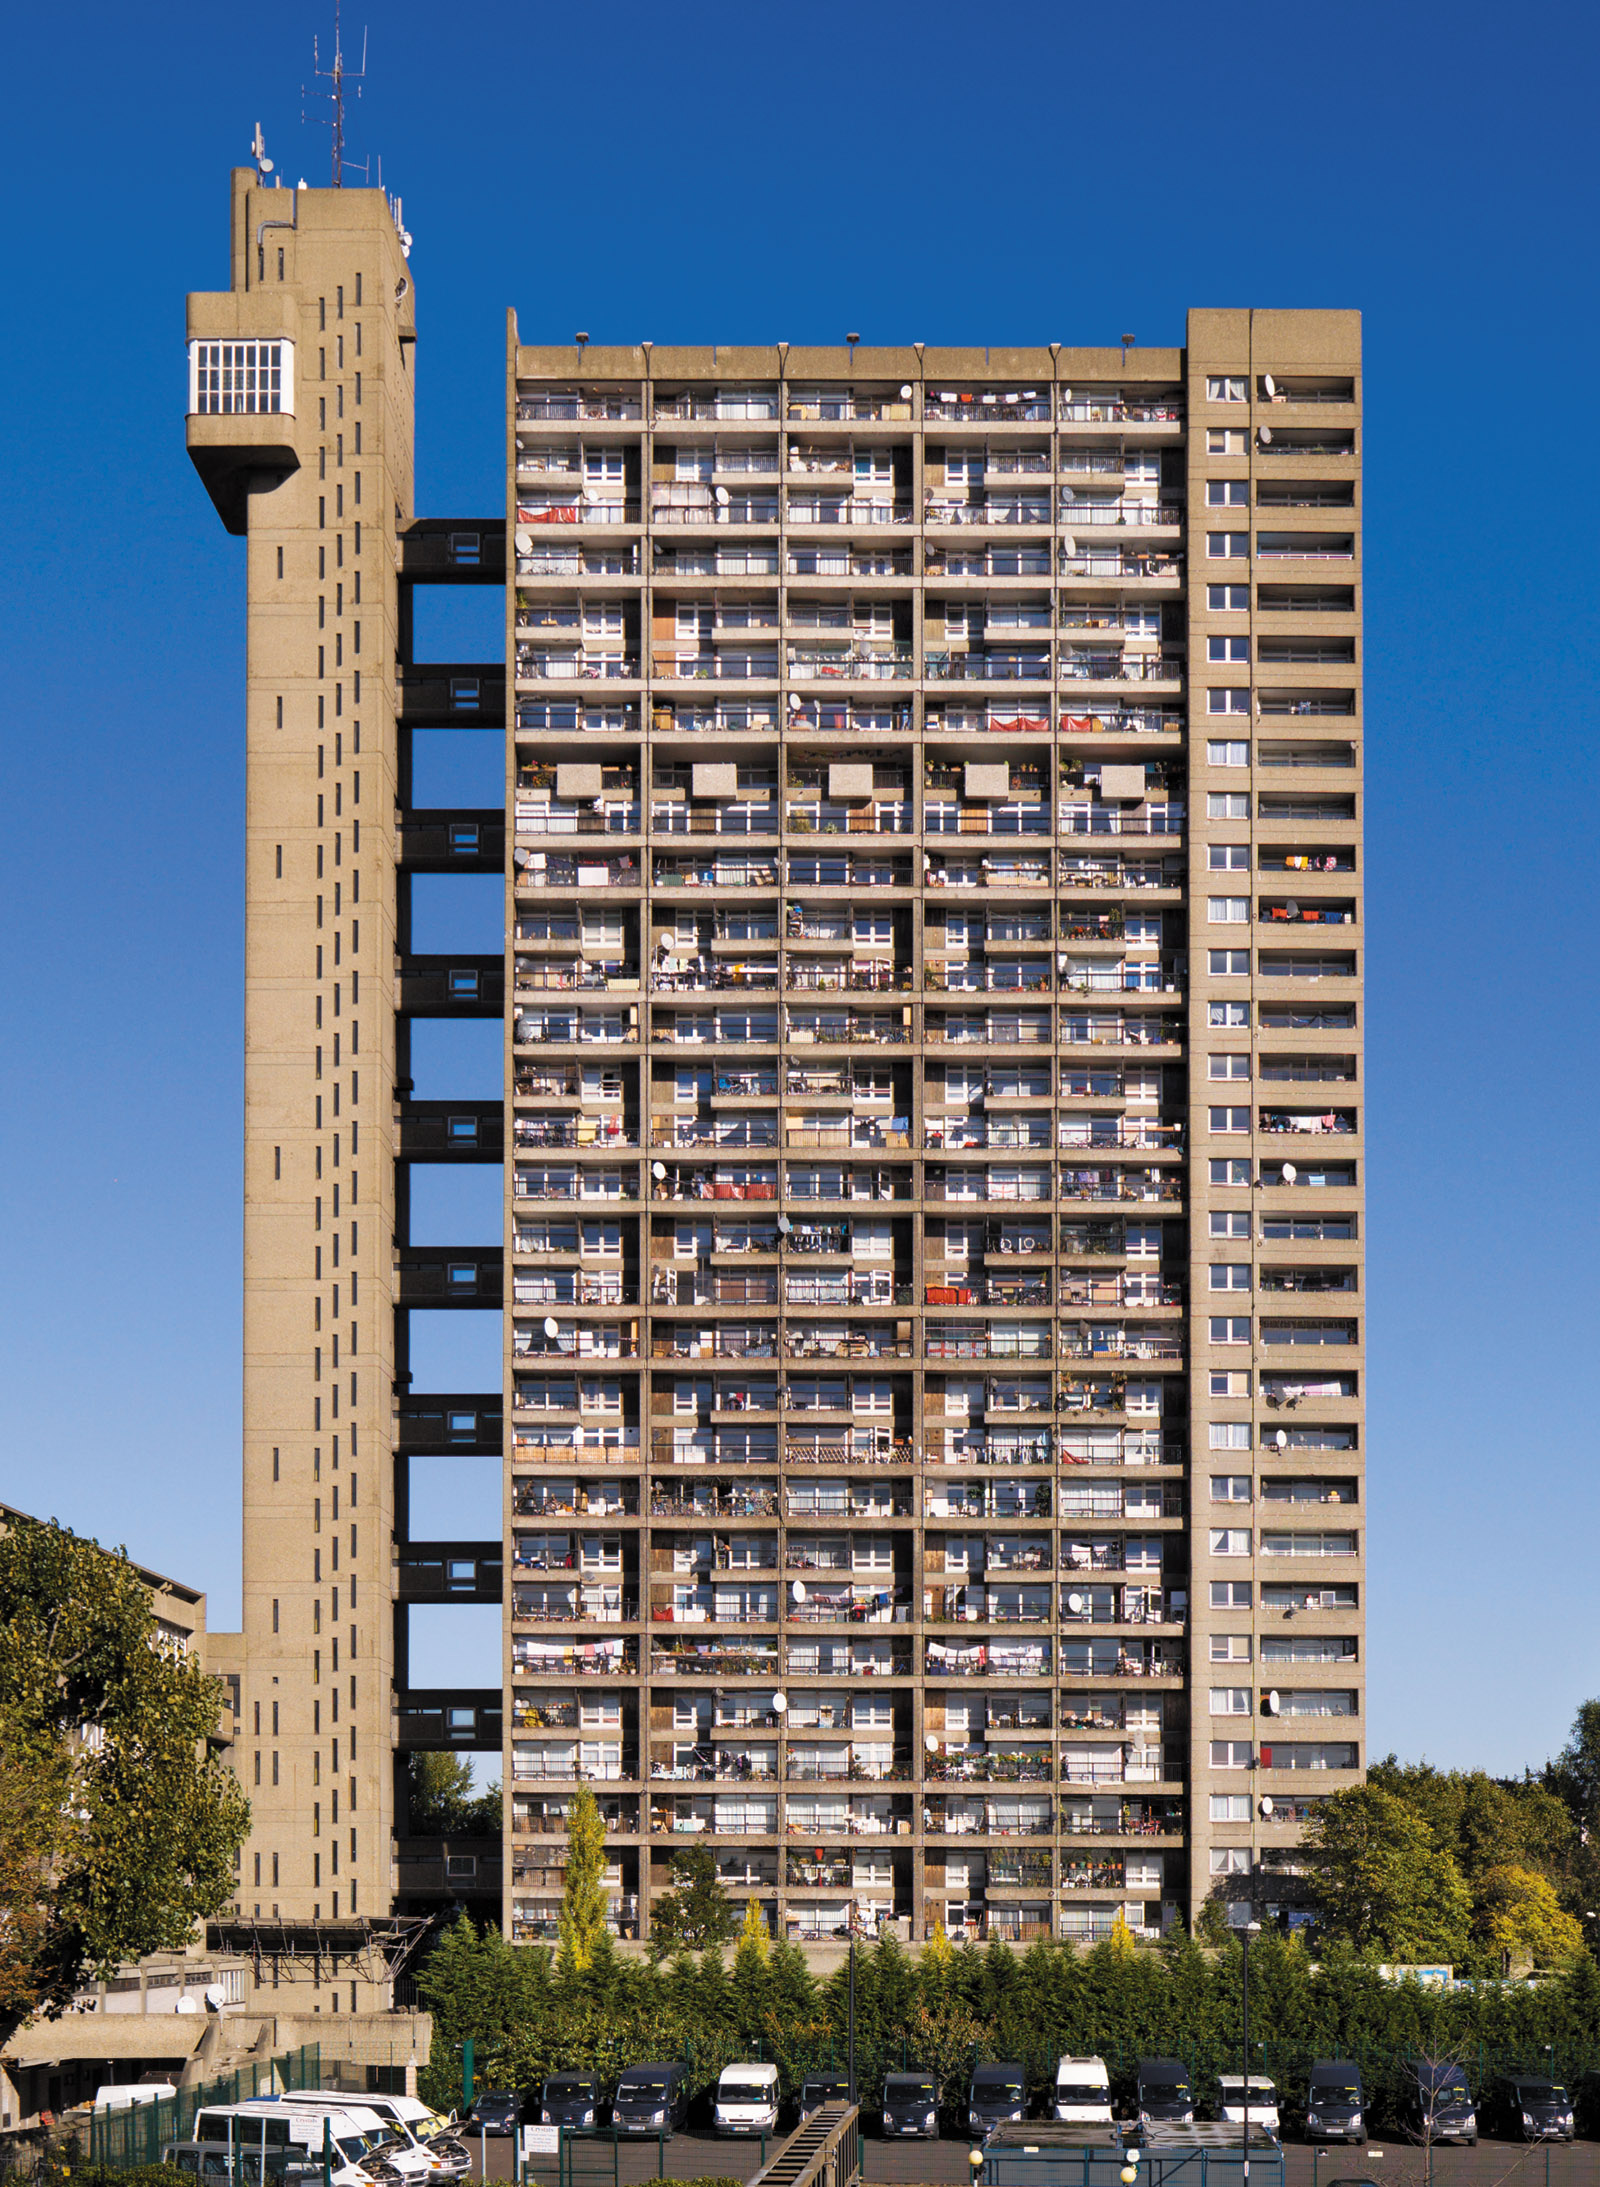 Trellick Tower, a thirty-one-story apartment block in North Kensington, London, designed by Ernő Goldfinger, 1966–1972; from Elain Harwood’s Space, Hope, and Brutalism: English Architecture, 1945–1975